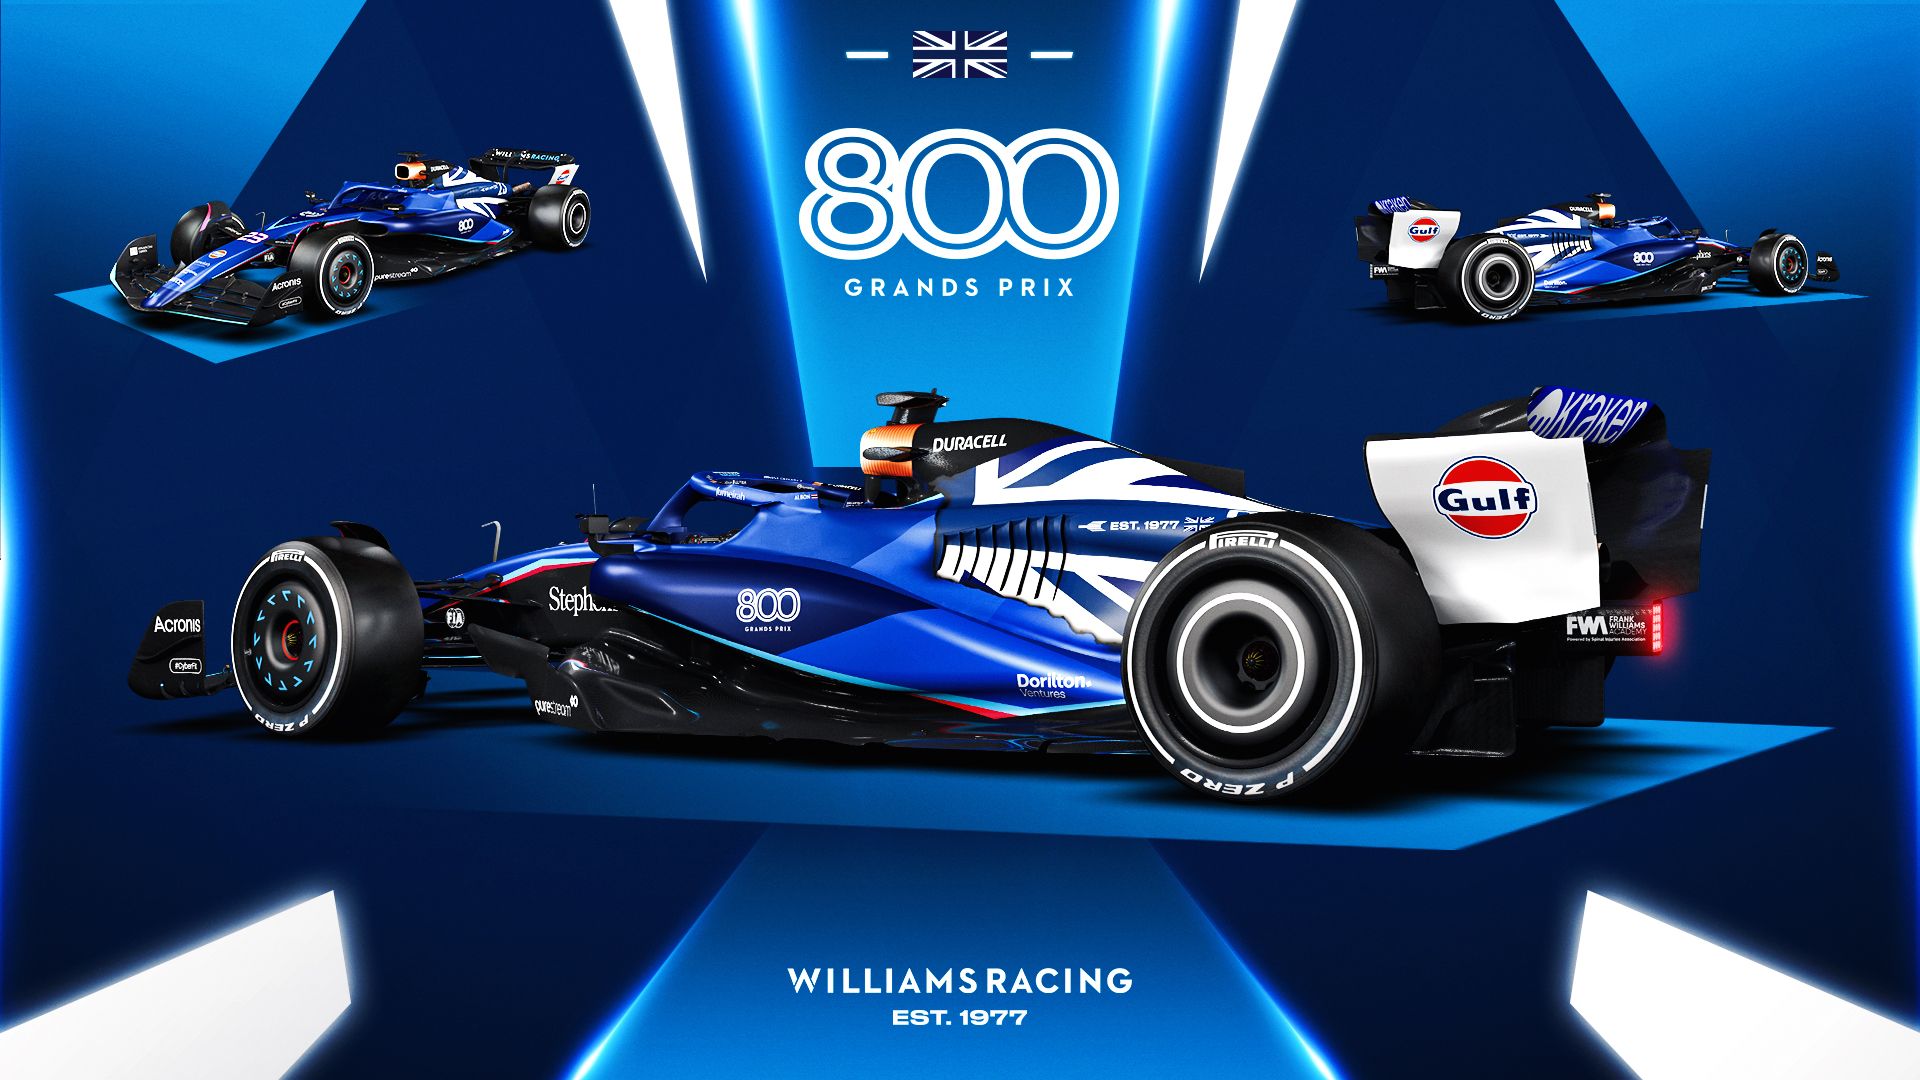 REVEALED Our adapted livery for the British Grand Prix Williams Racing